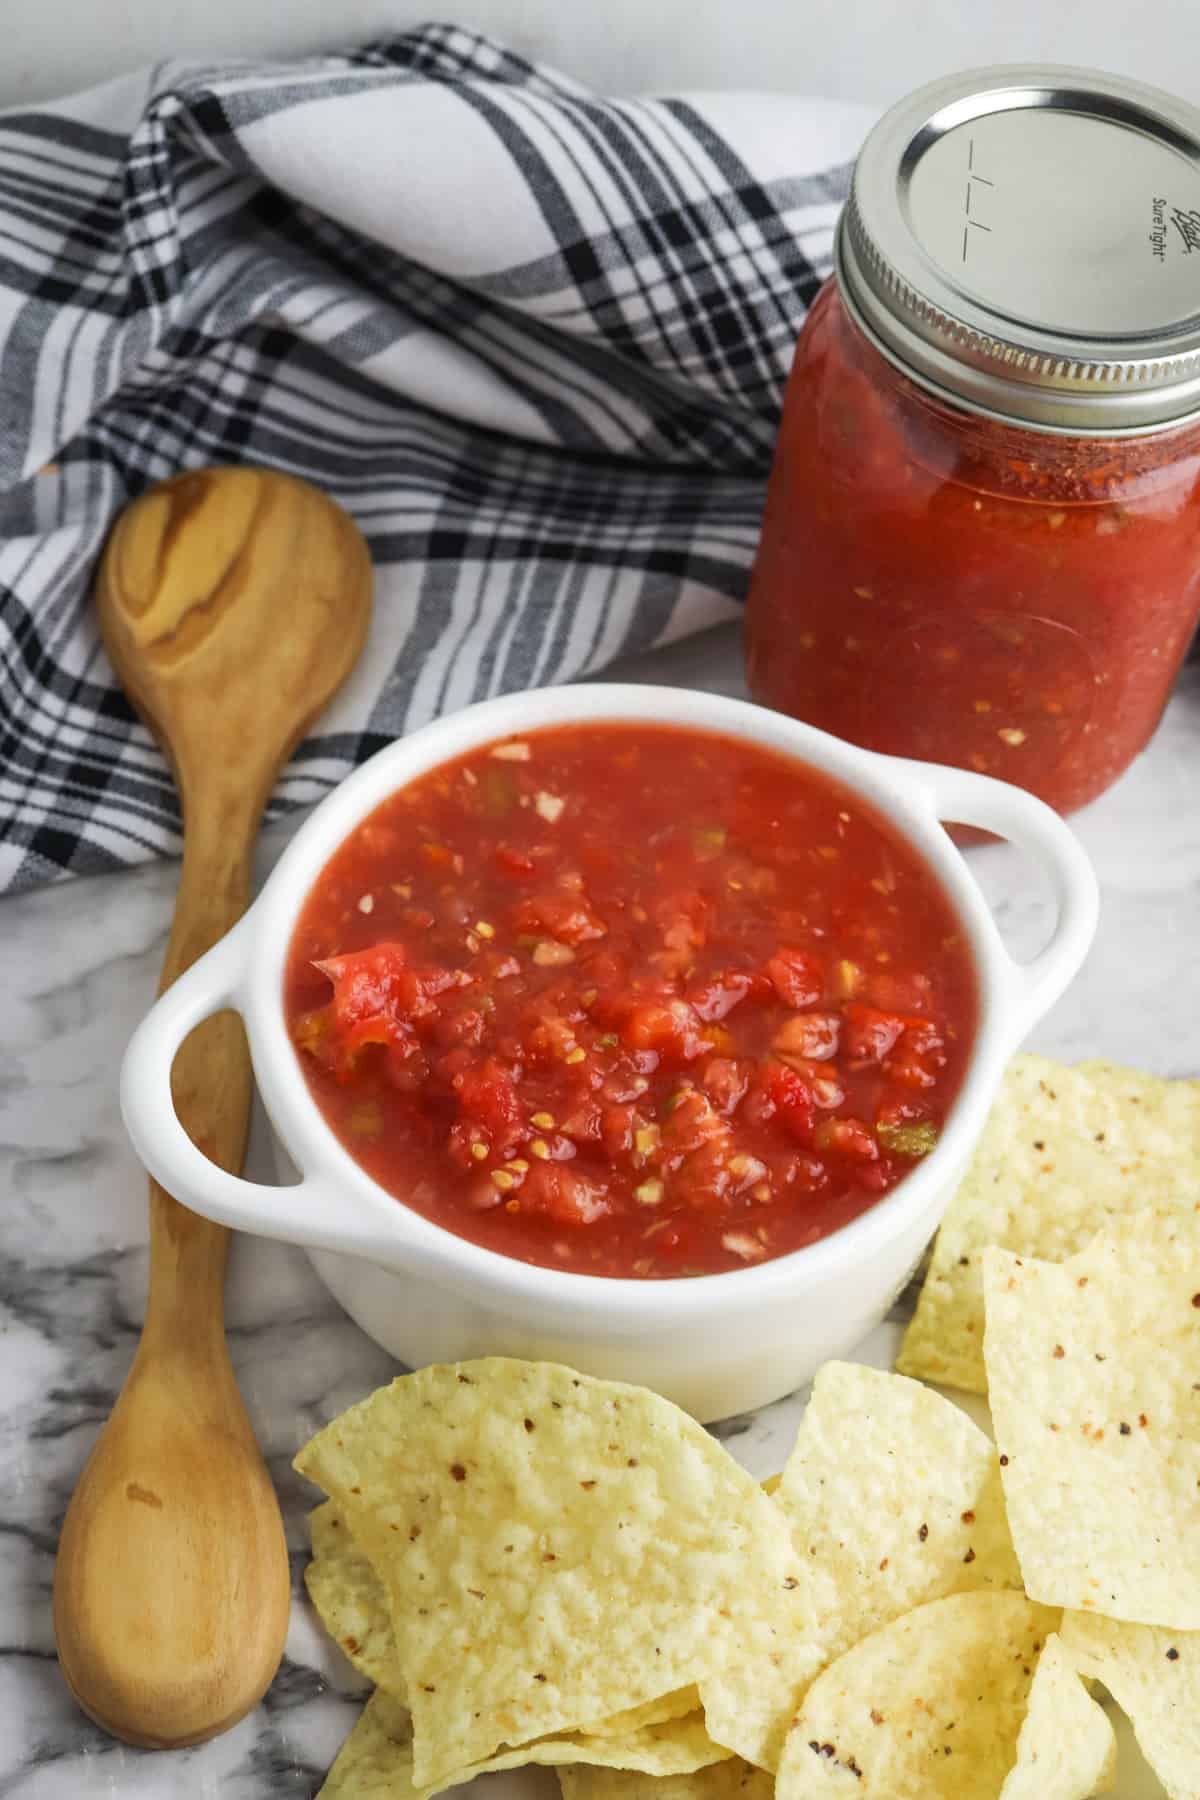 Bowl of homemade salsa with tortilla chips, cloth napkin, wooden spoons, and jar of homemade salsa in background